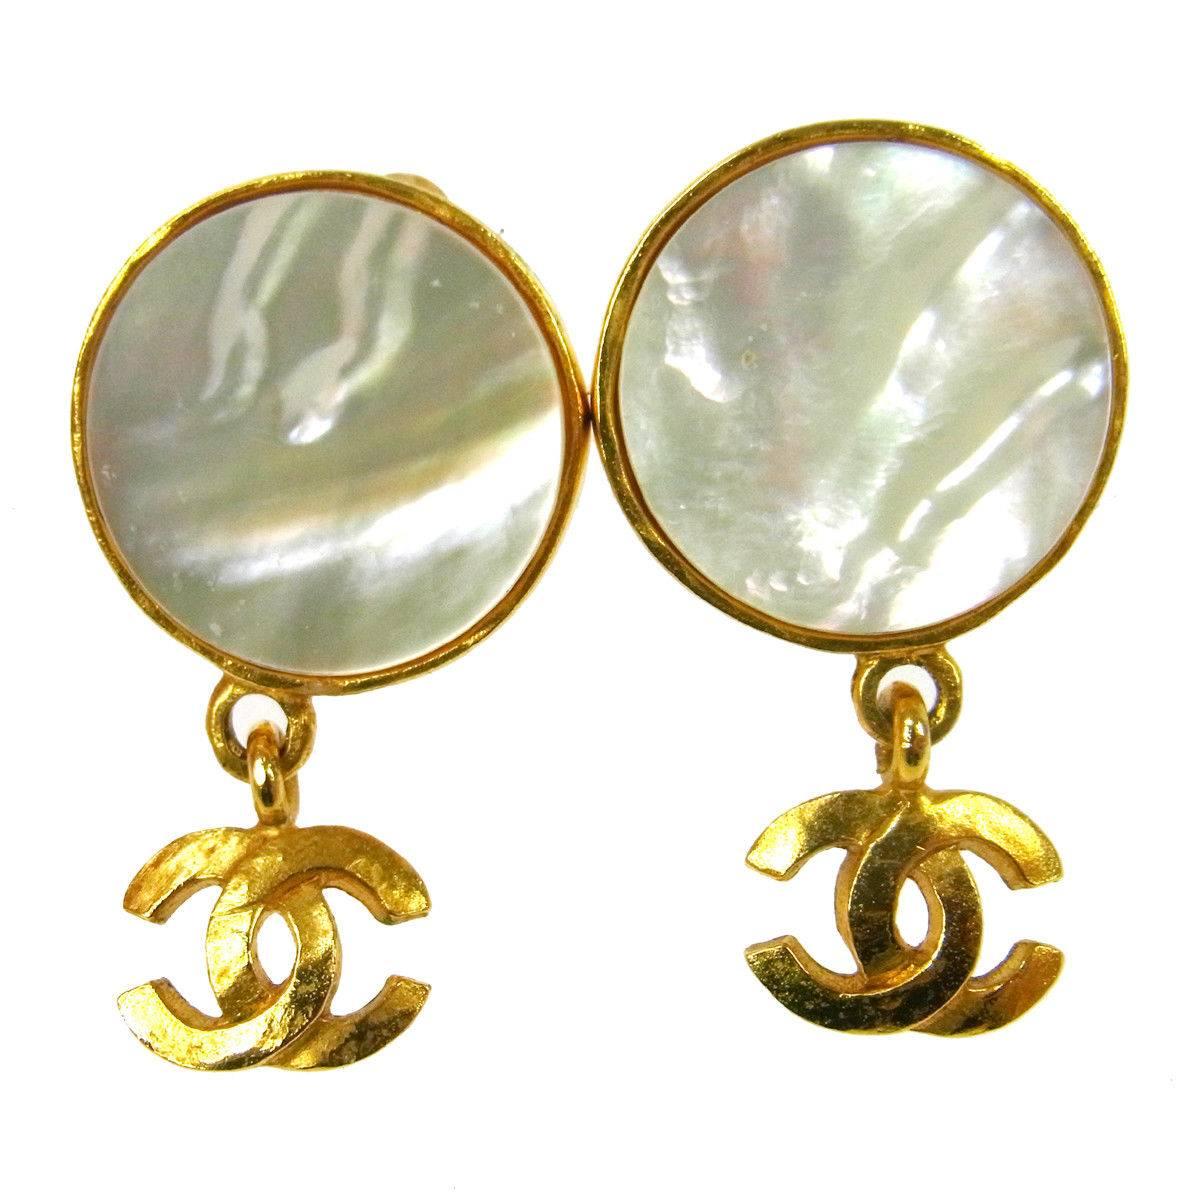 Chanel Gold Metallic Iridescent Shell Charm Dandle Drop Evening Earrings in Box